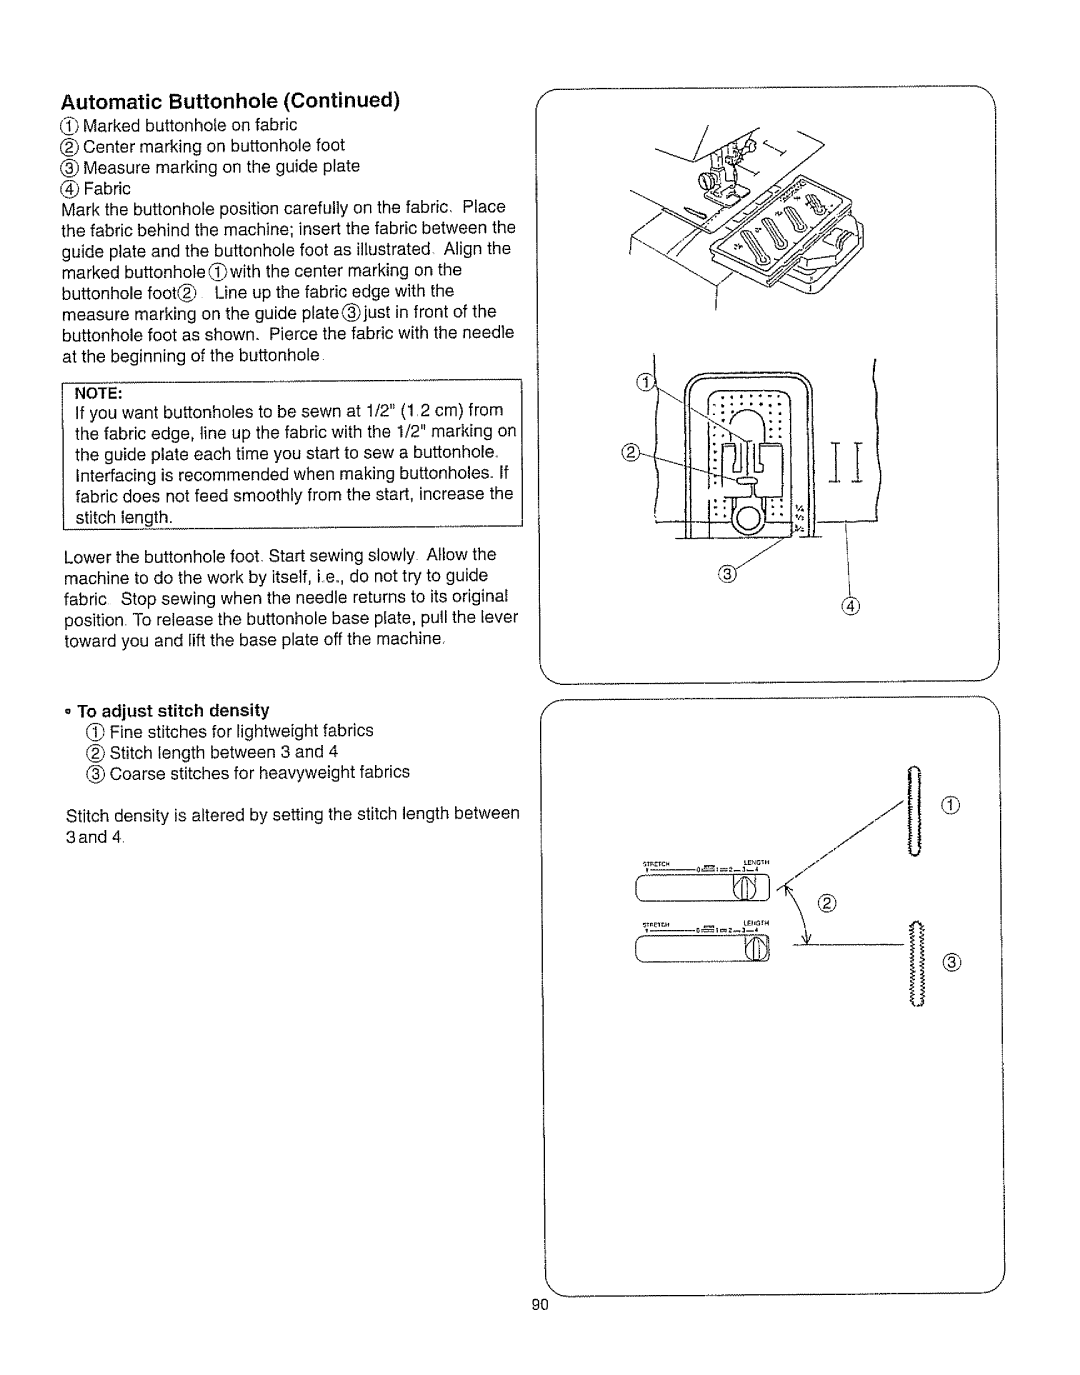 Kenmore 385.162213 owner manual Automatic Buttonhole Continued, Marked buttonhole on fabric 